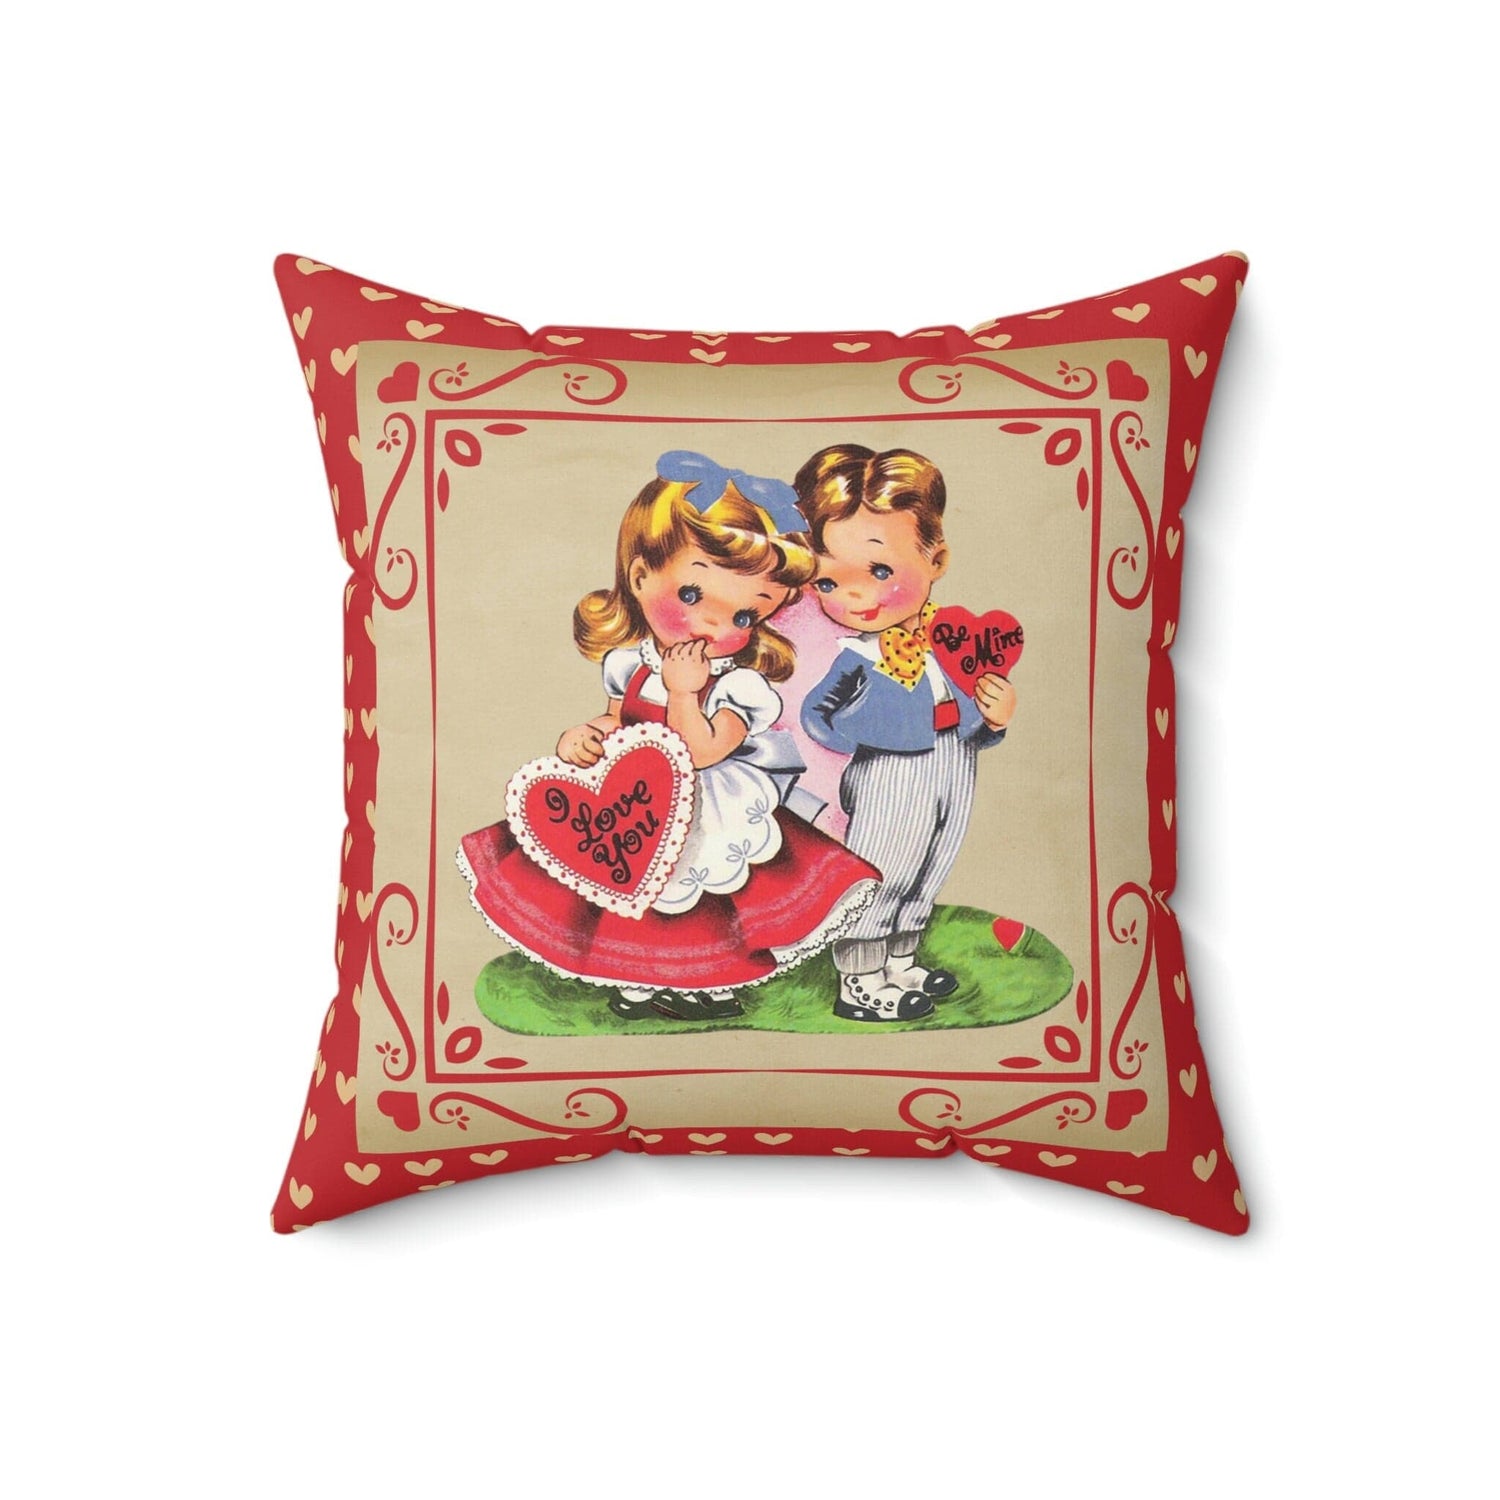 Kate McEnroe New York Vintage Valentine Boy and Girl Hearts Throw Pillow CoverThrow Pillow Covers30055391513593850243